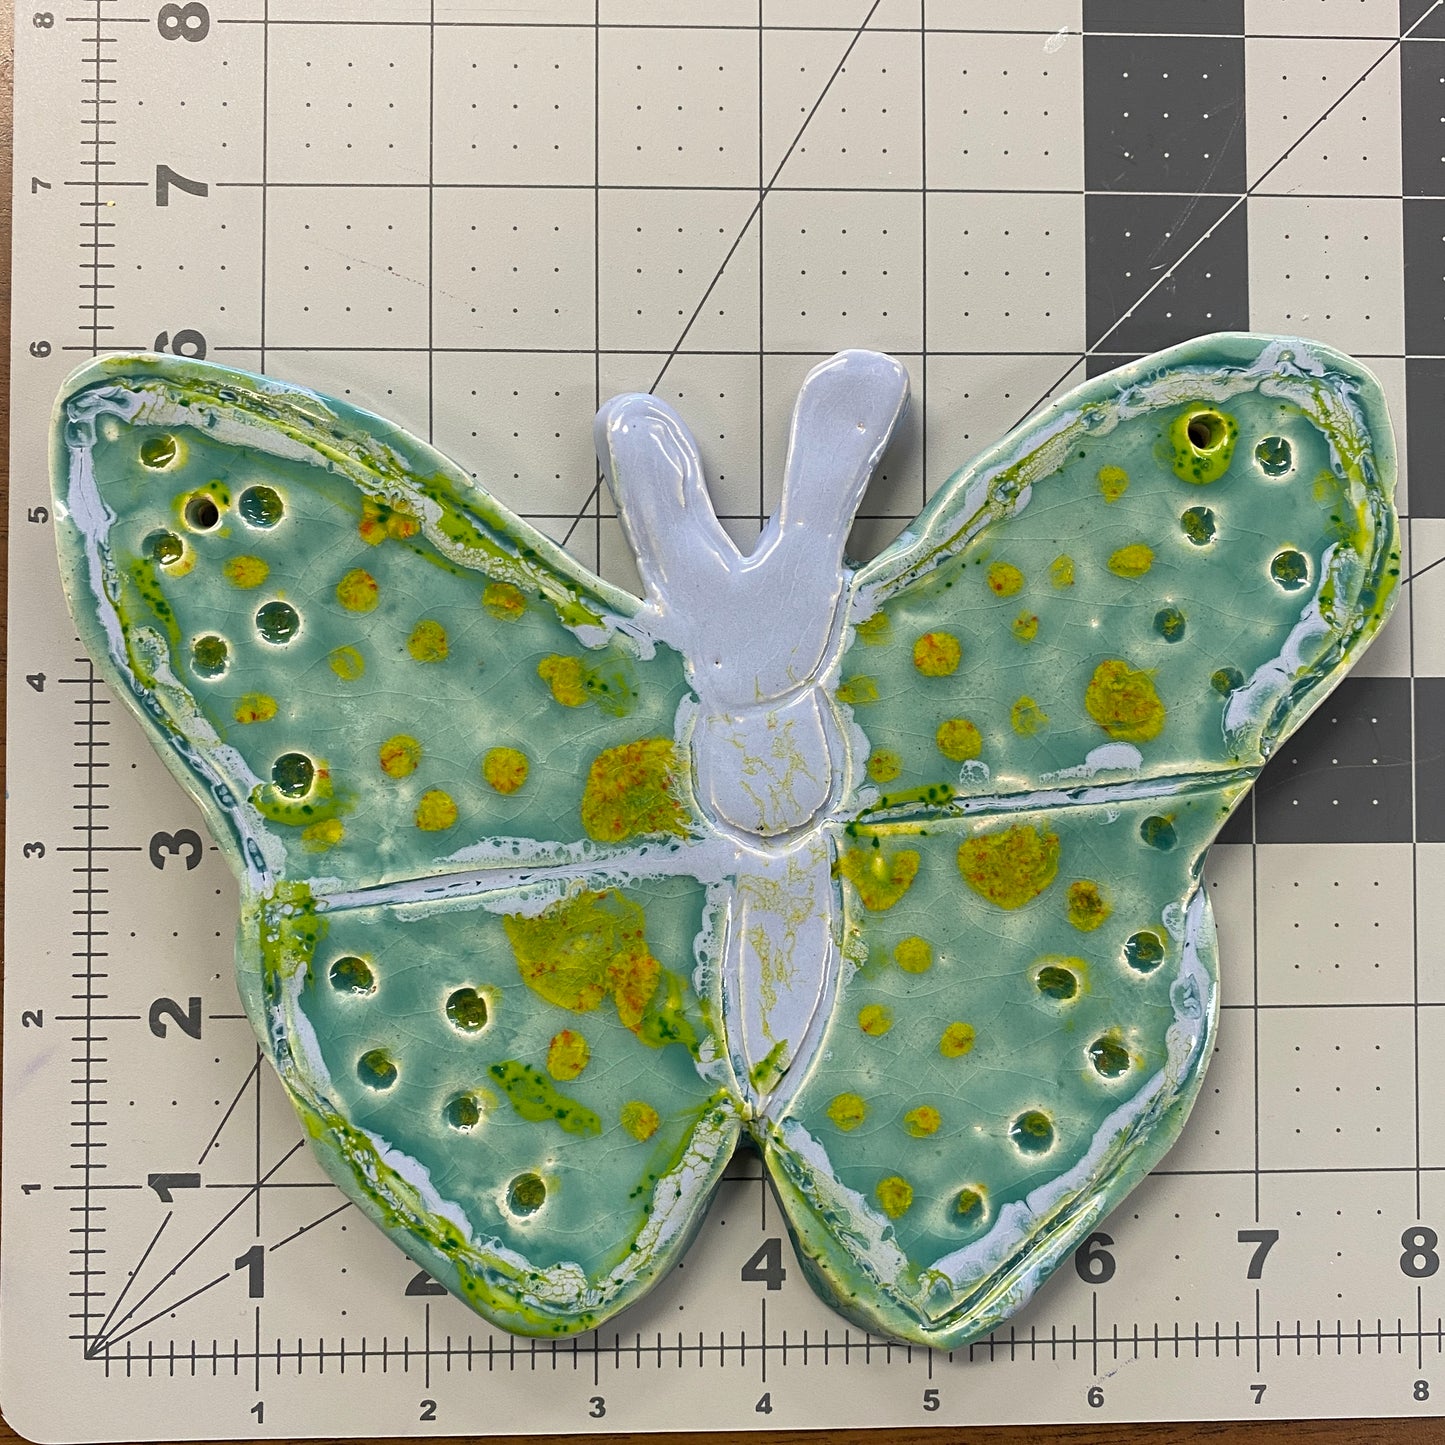 Ceramic Arts Handmade Clay Crafts Glazed 8-inch x 6-inch Butterfly made by Emily Knoles